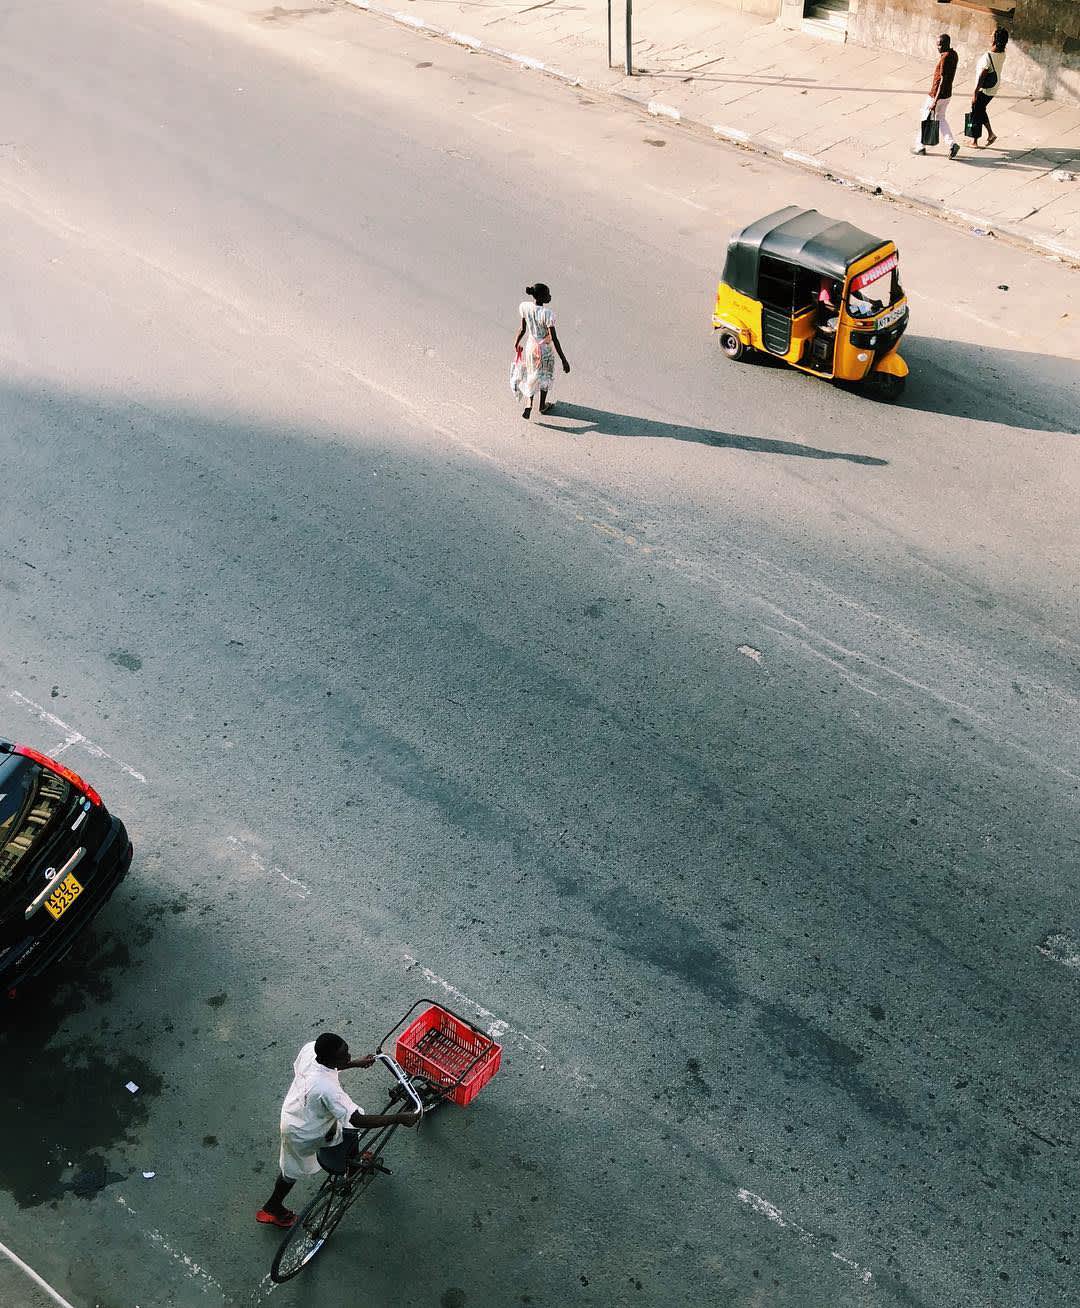 Tuktuks have found their way across the Indian Ocean, into Mombasa